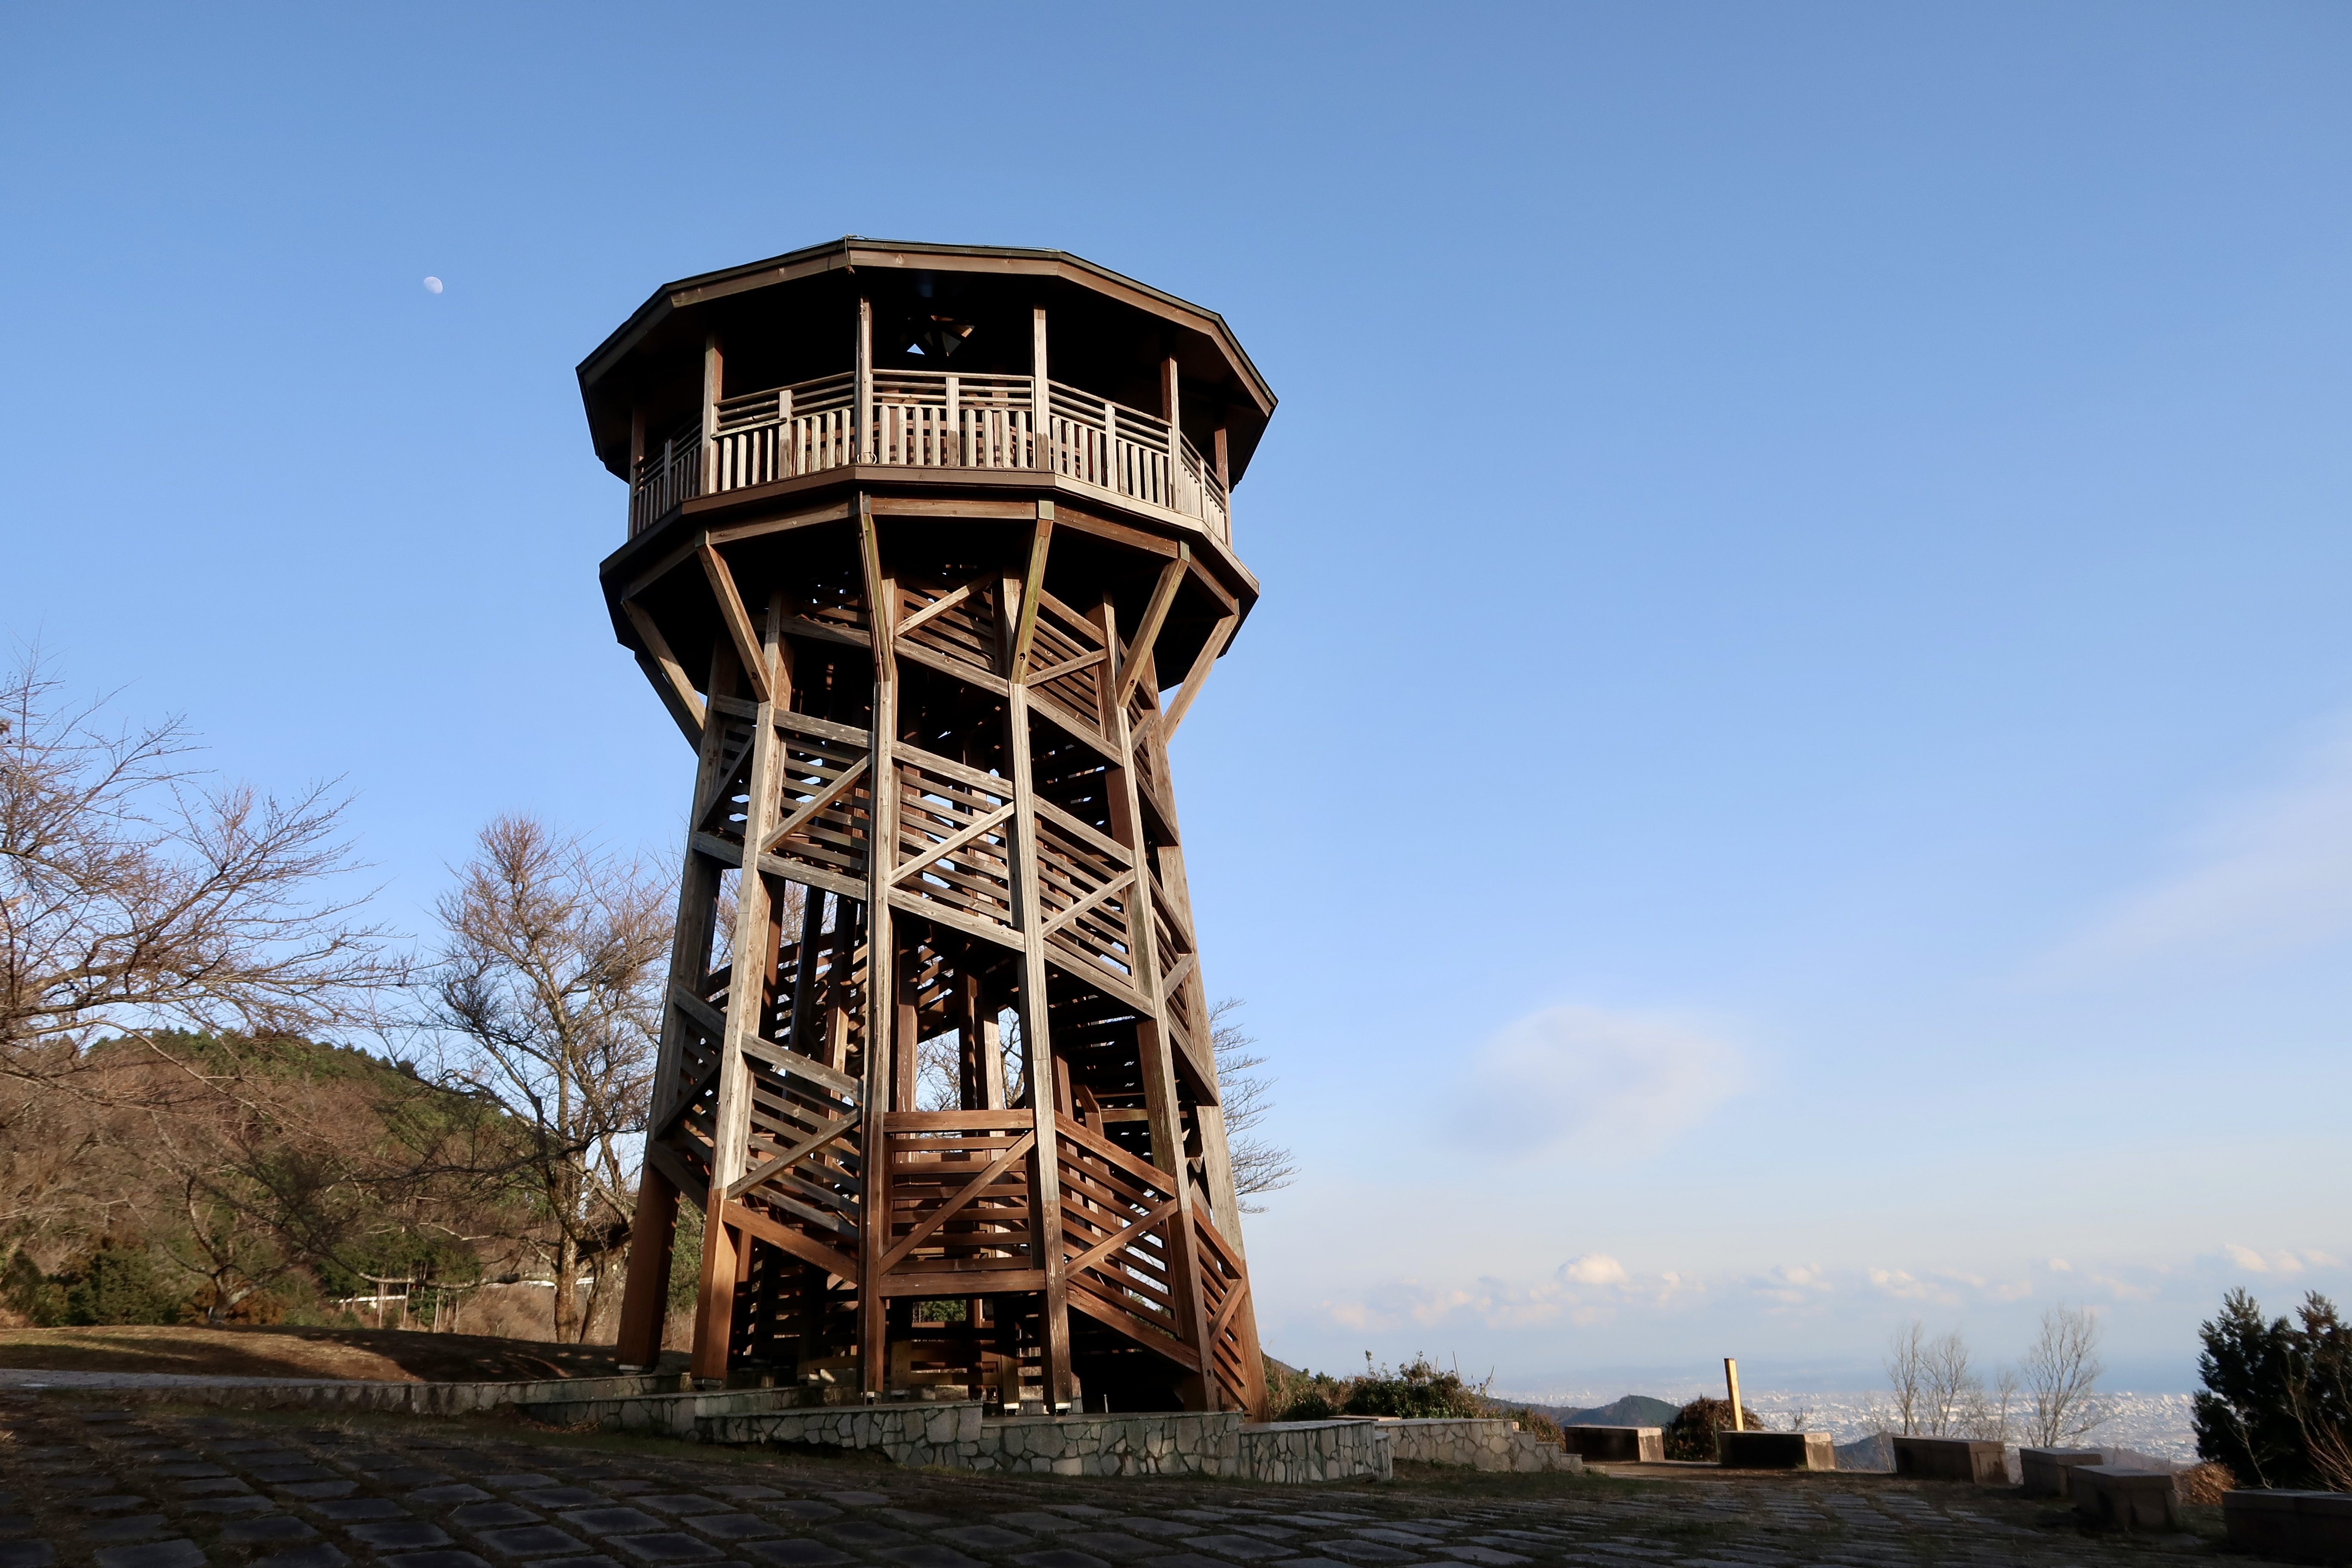 An observation tower with stunning views